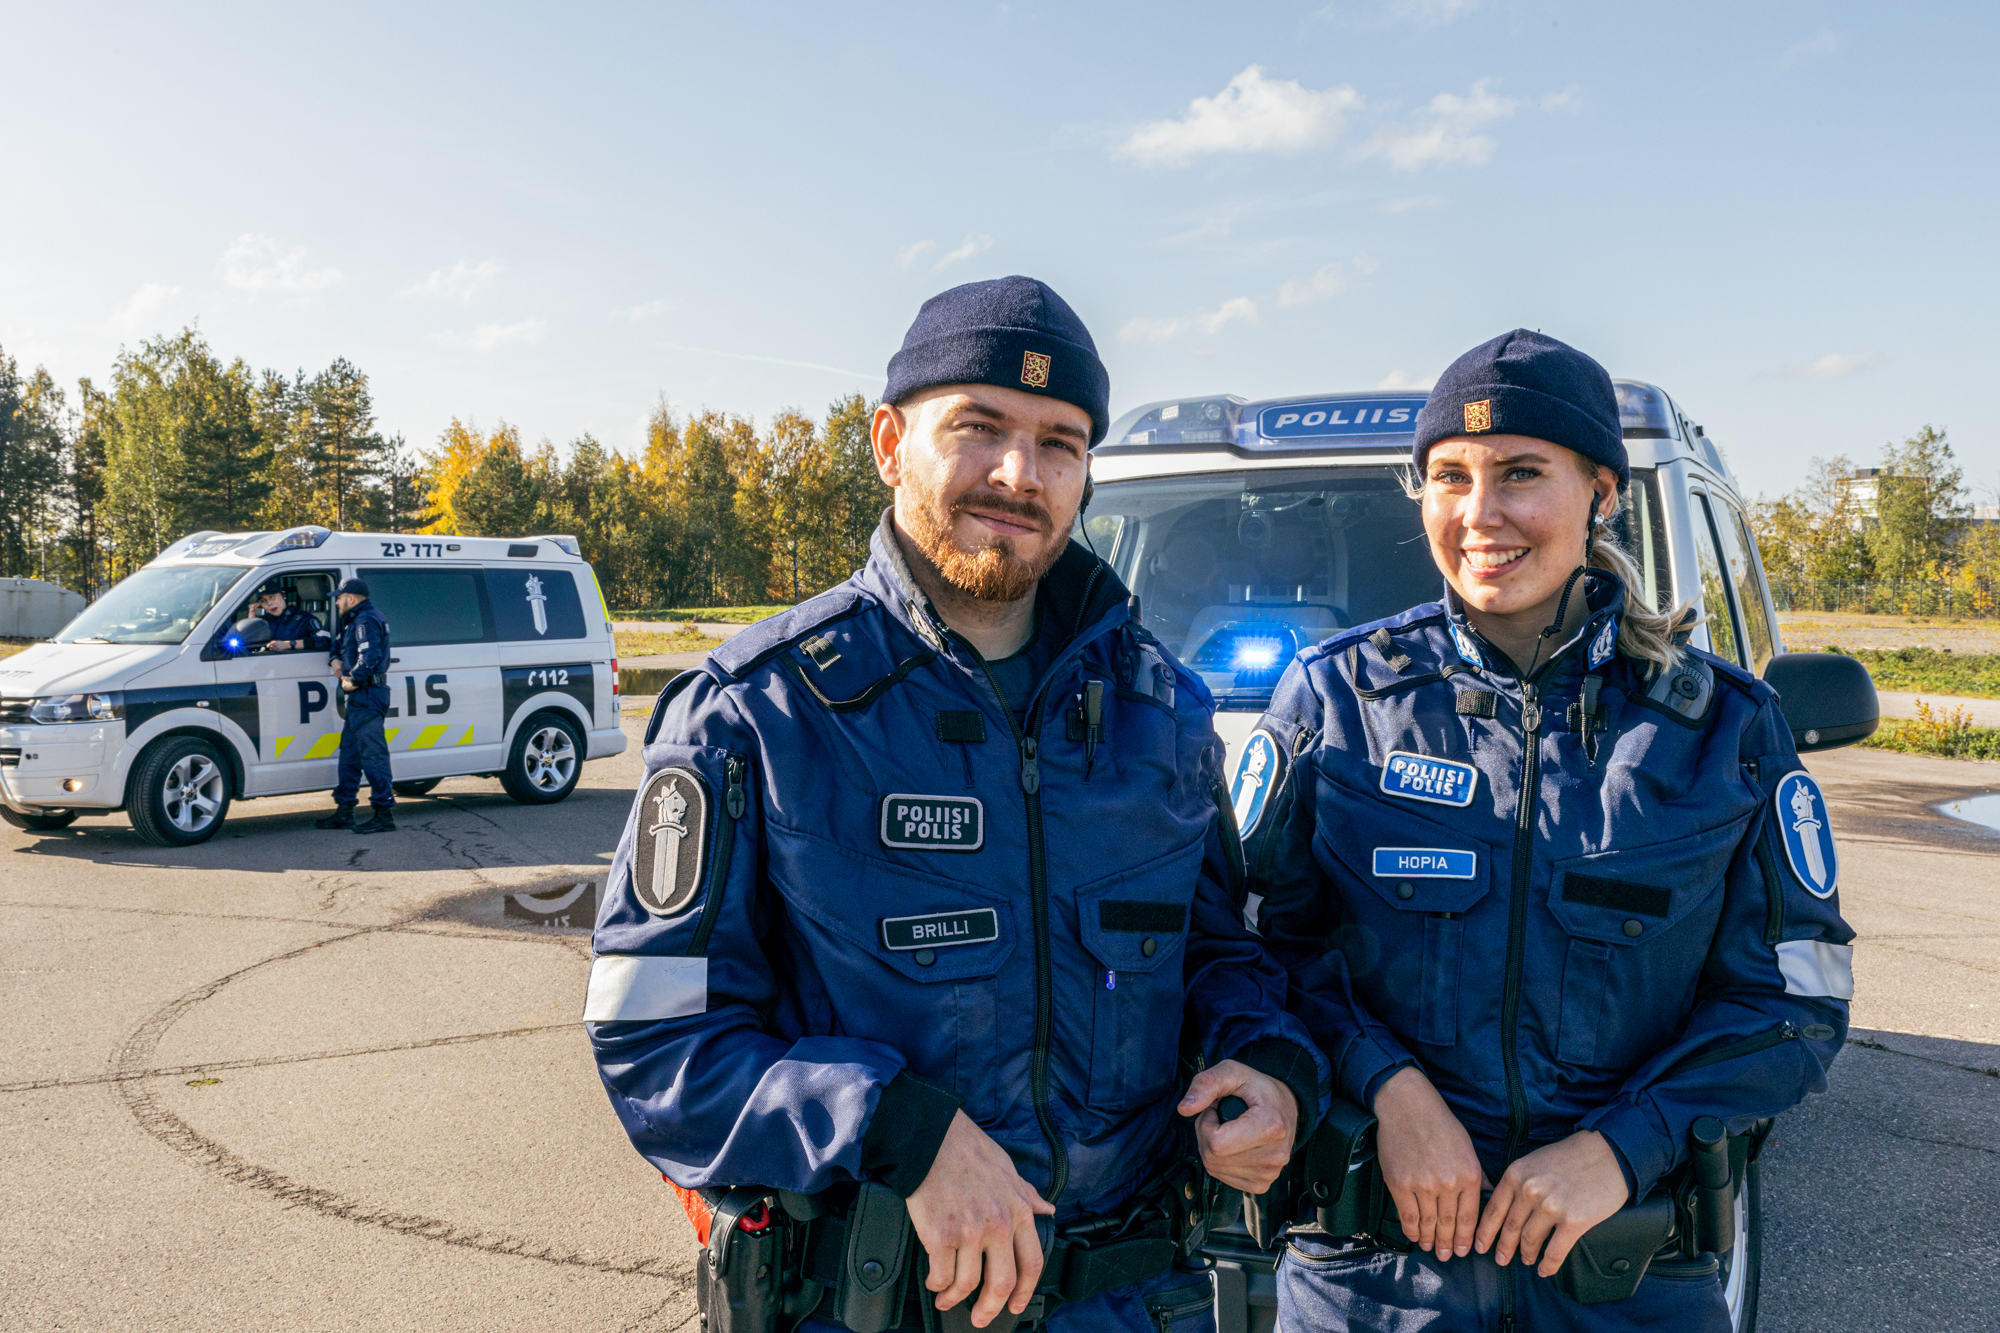 Two police students in uniform on Polamk driver training track, with two police cars and two police students in the background.